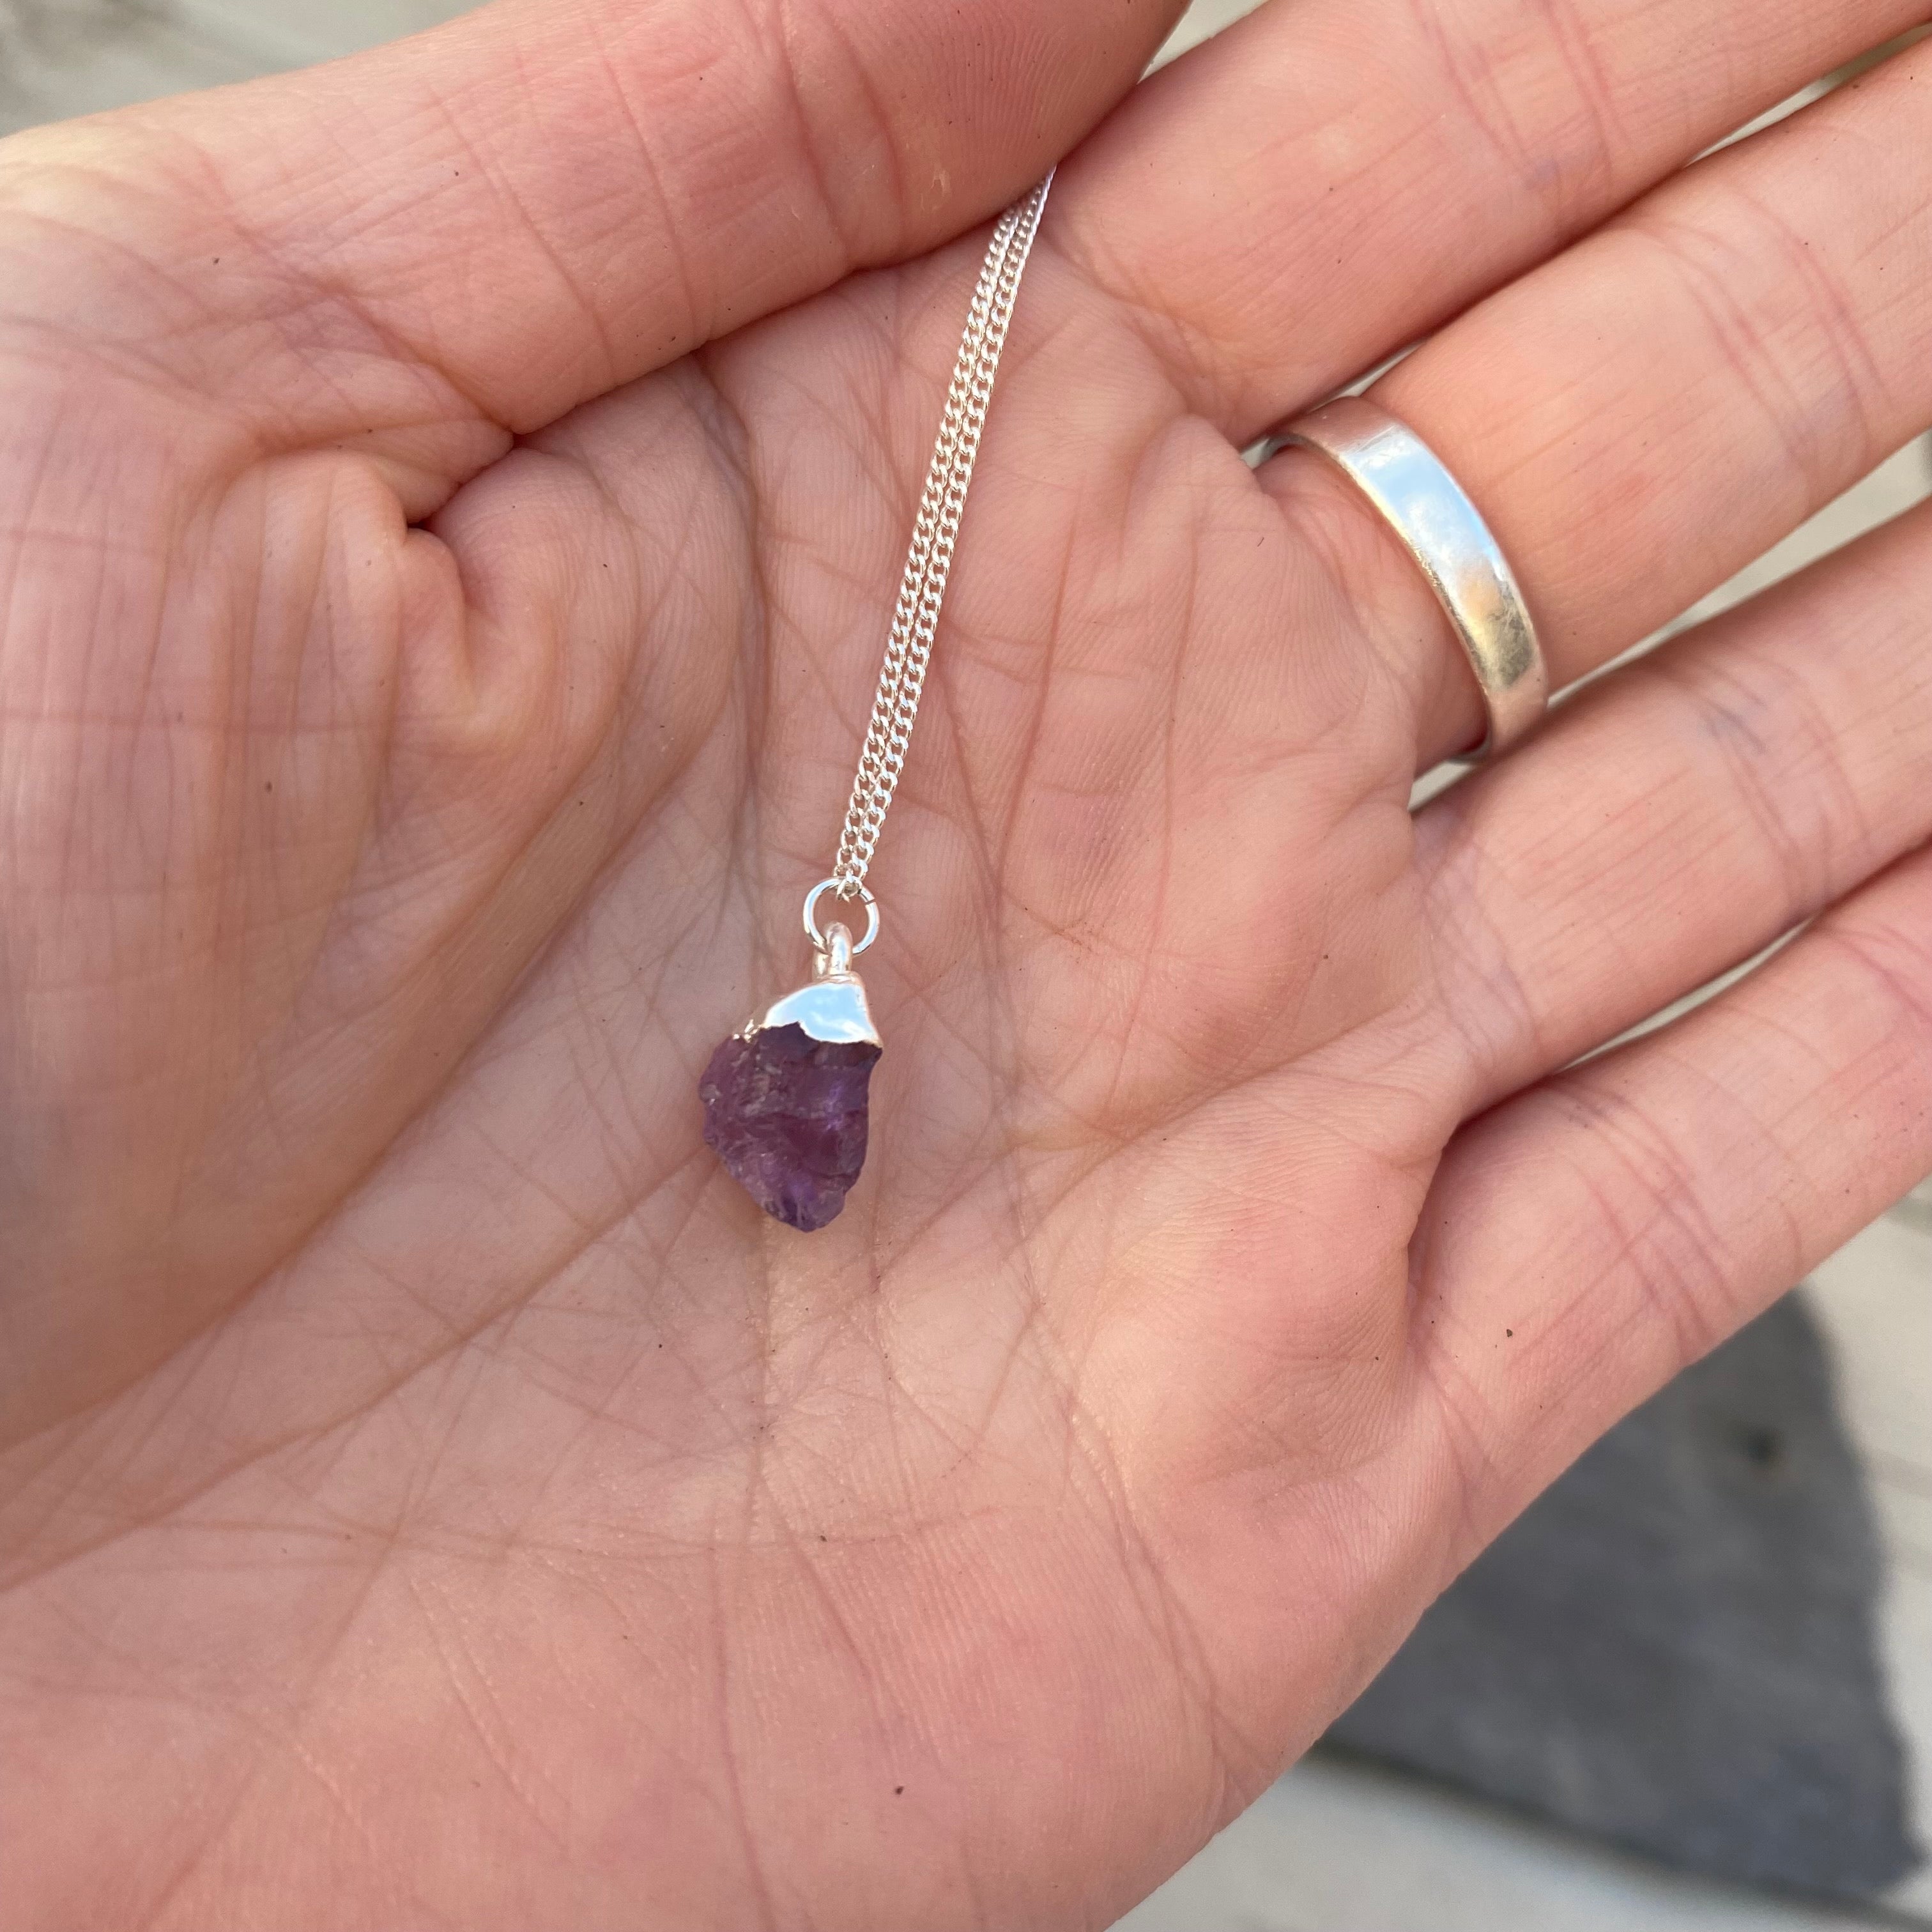 Birthstone Necklace - Raw Crystal and Sterling Silver February Amethyst 18"